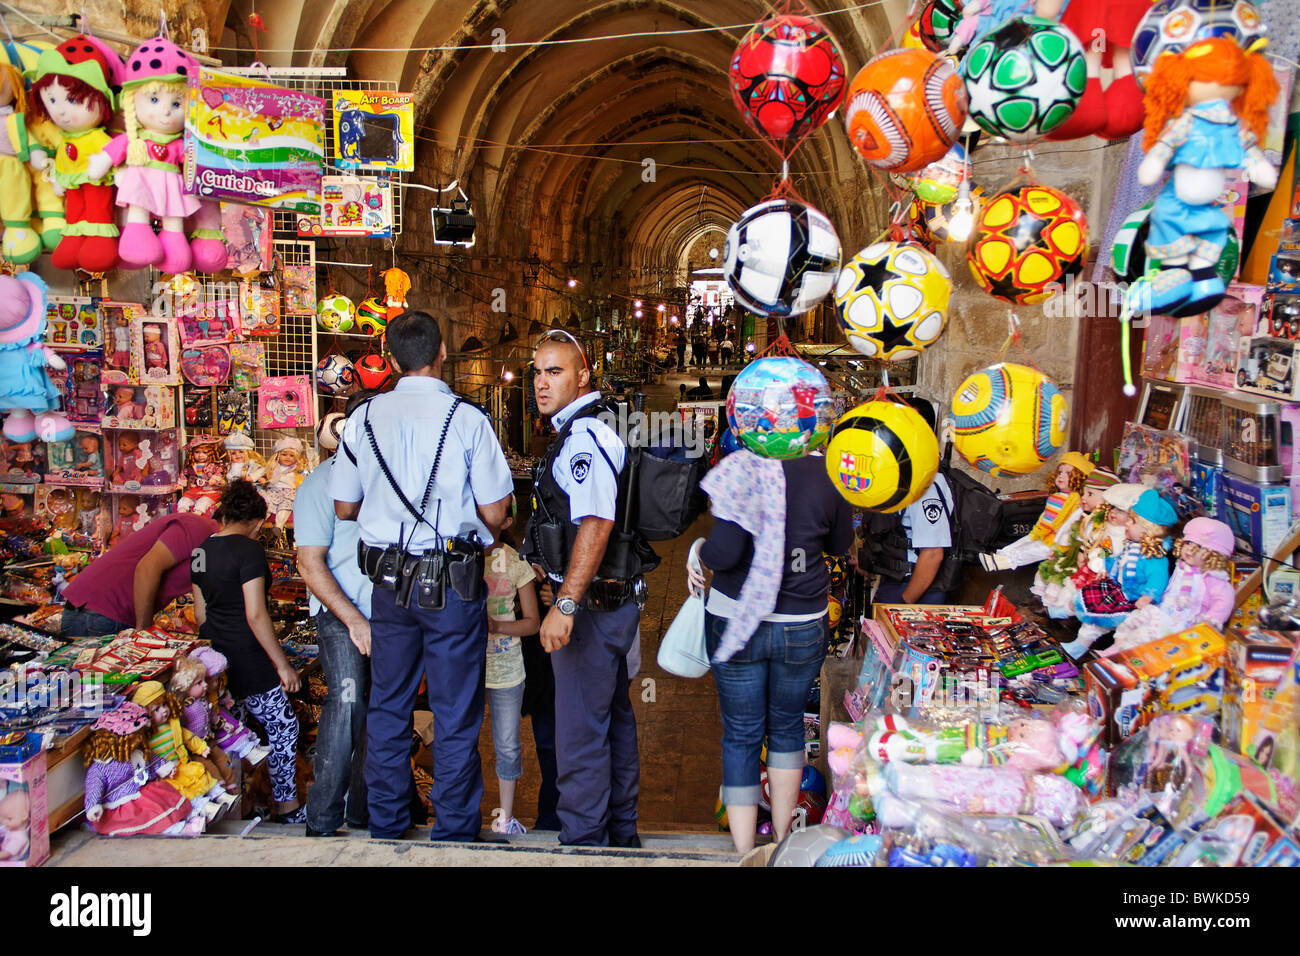 Police at a gate of old city, inspect identity documents Stock Photo